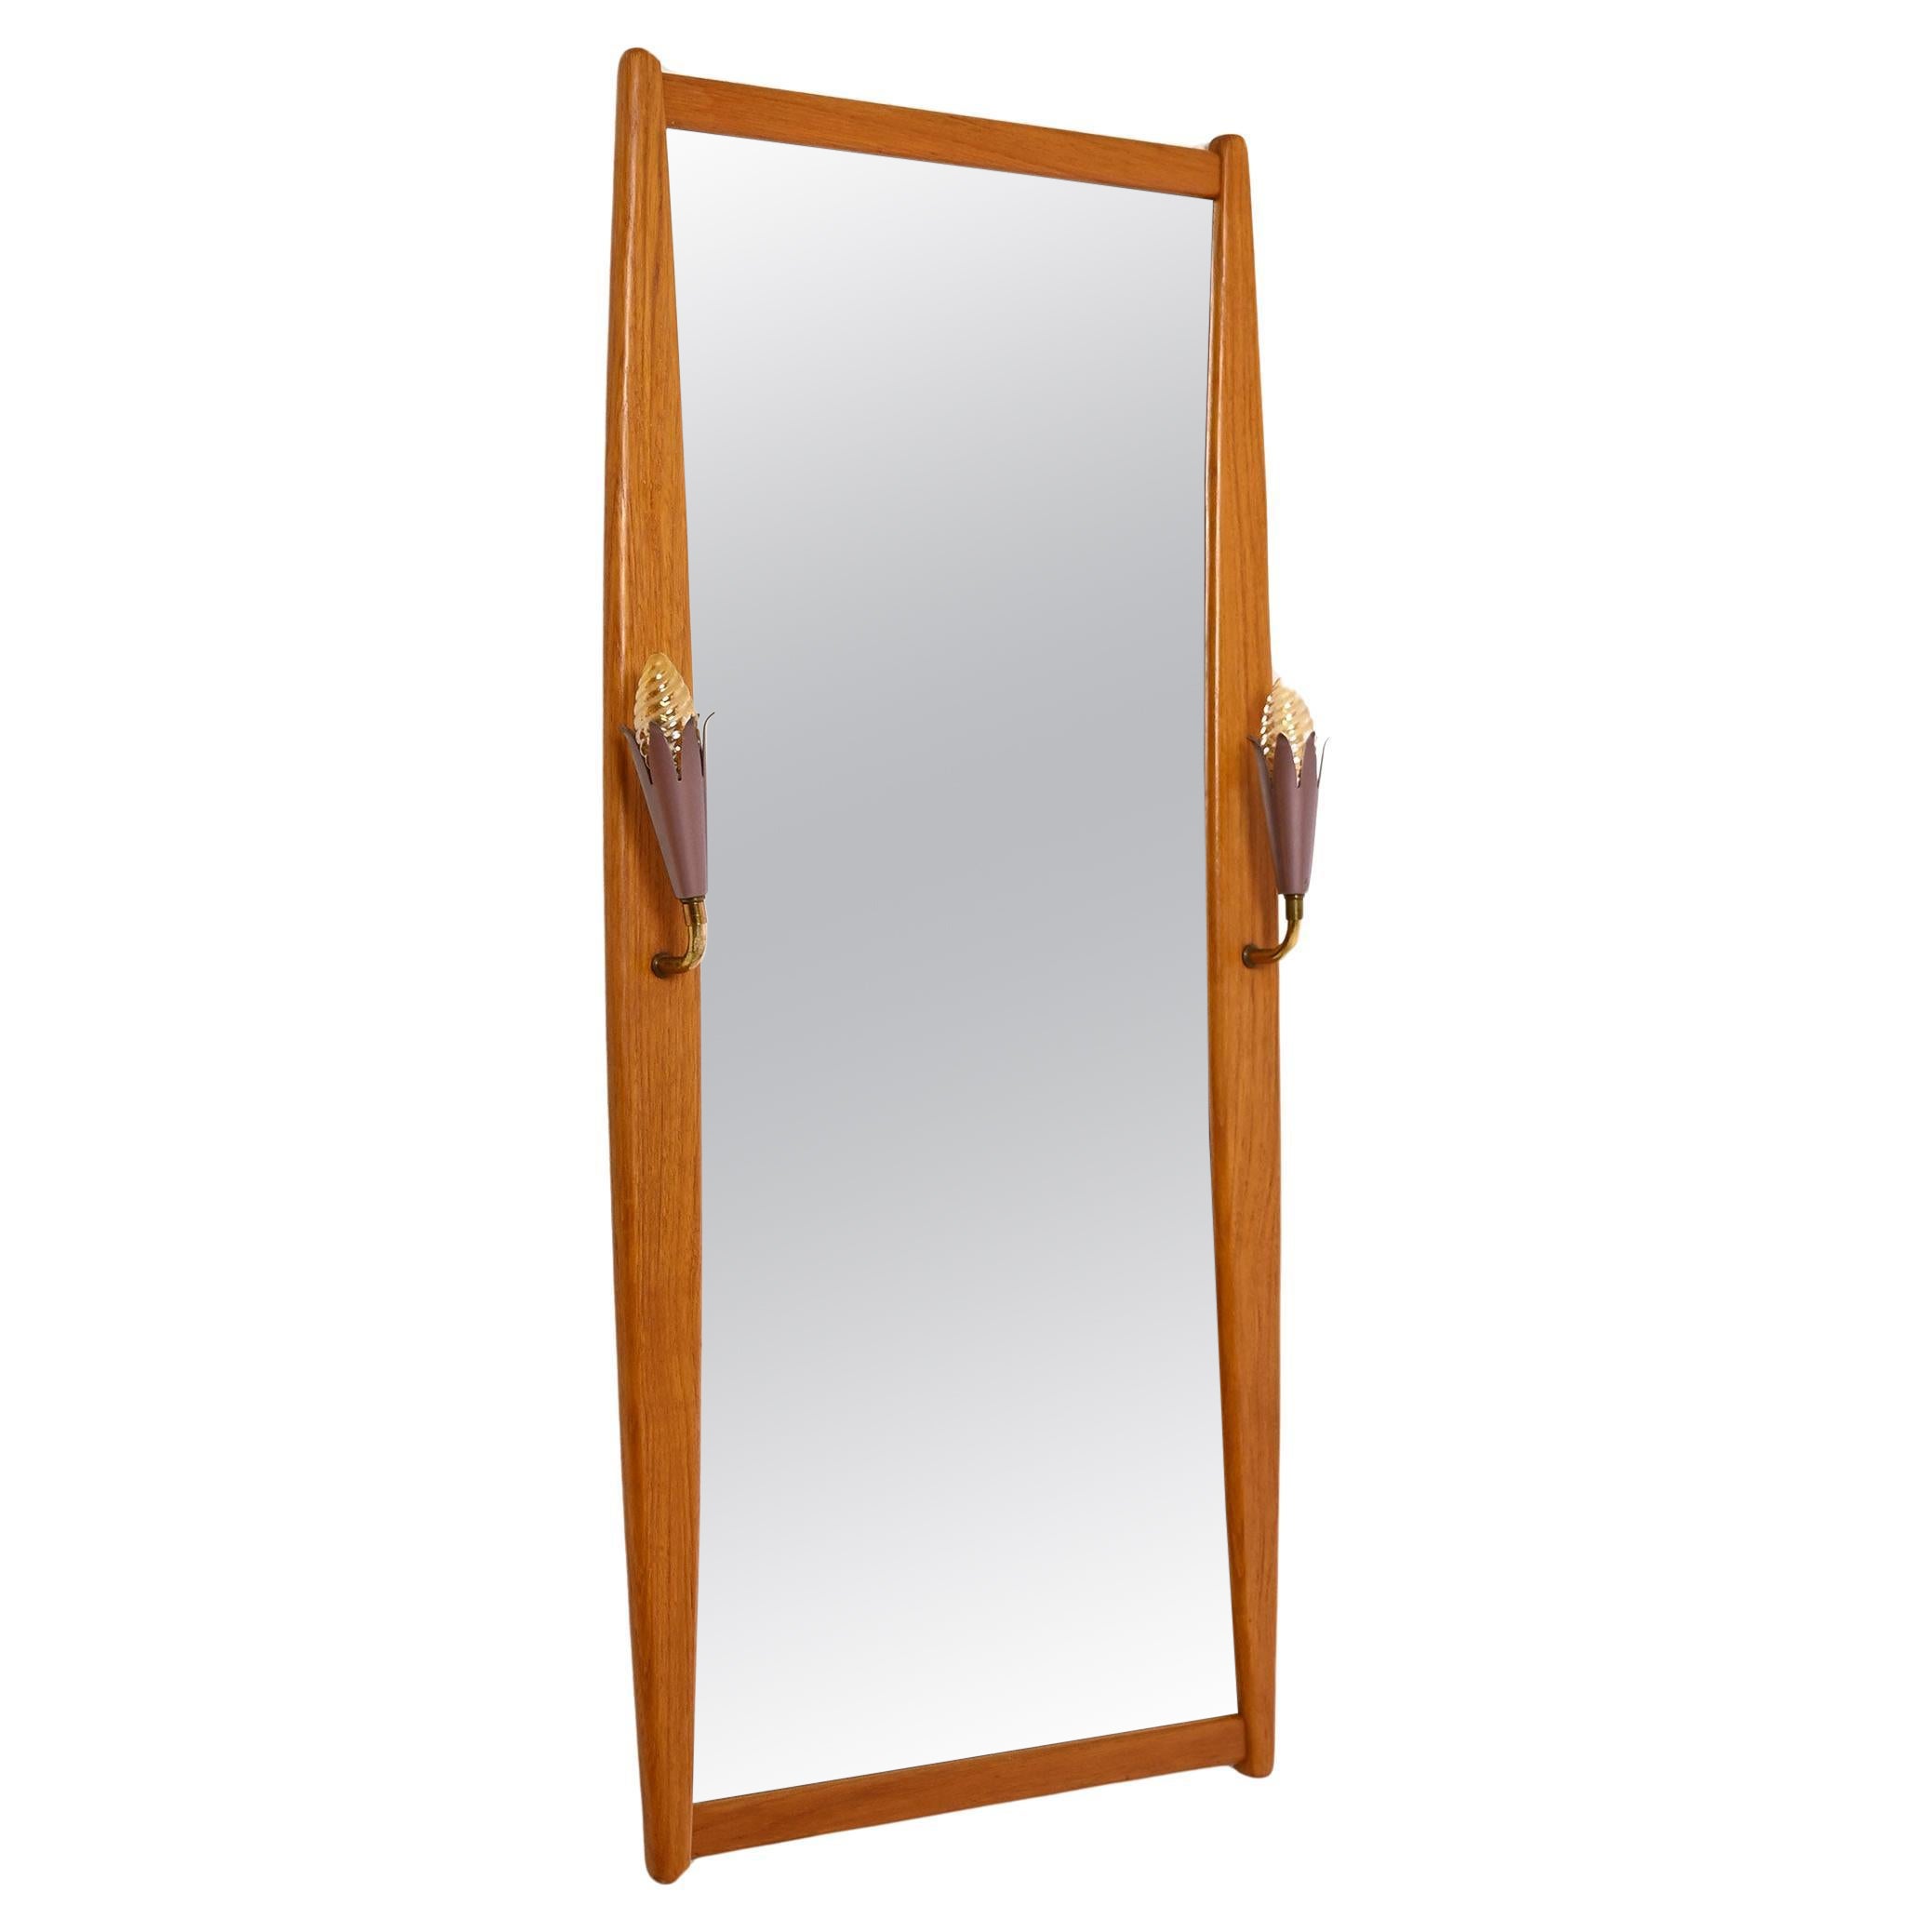 Mirror with wooden frame and two light points